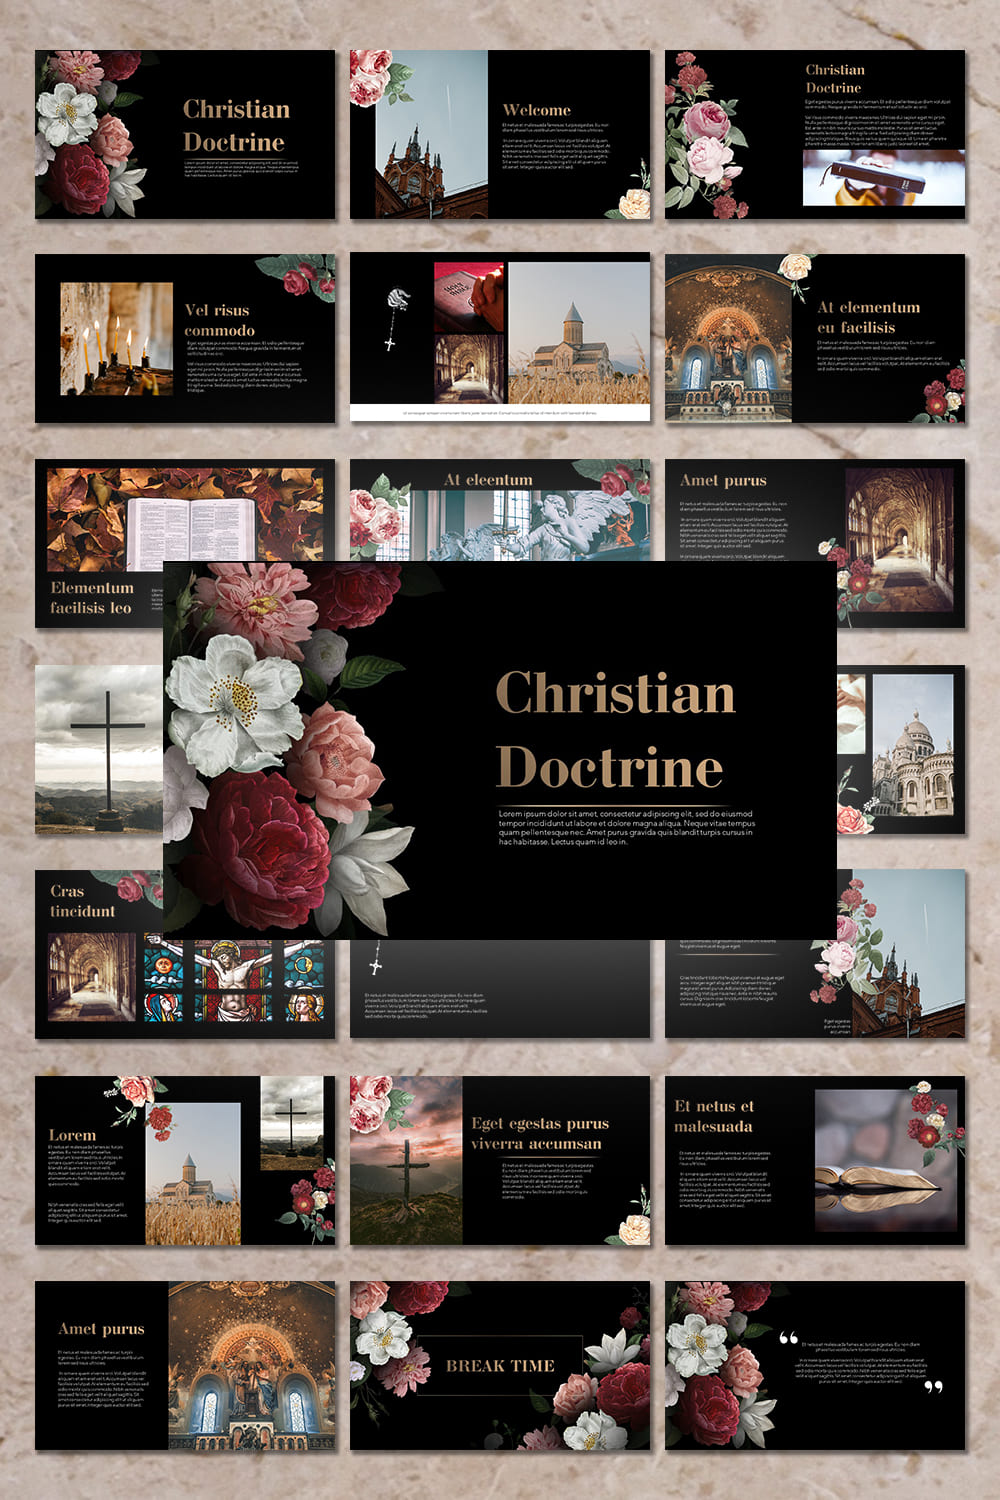 Picture Christian Doctrine in black style for Pinterest.